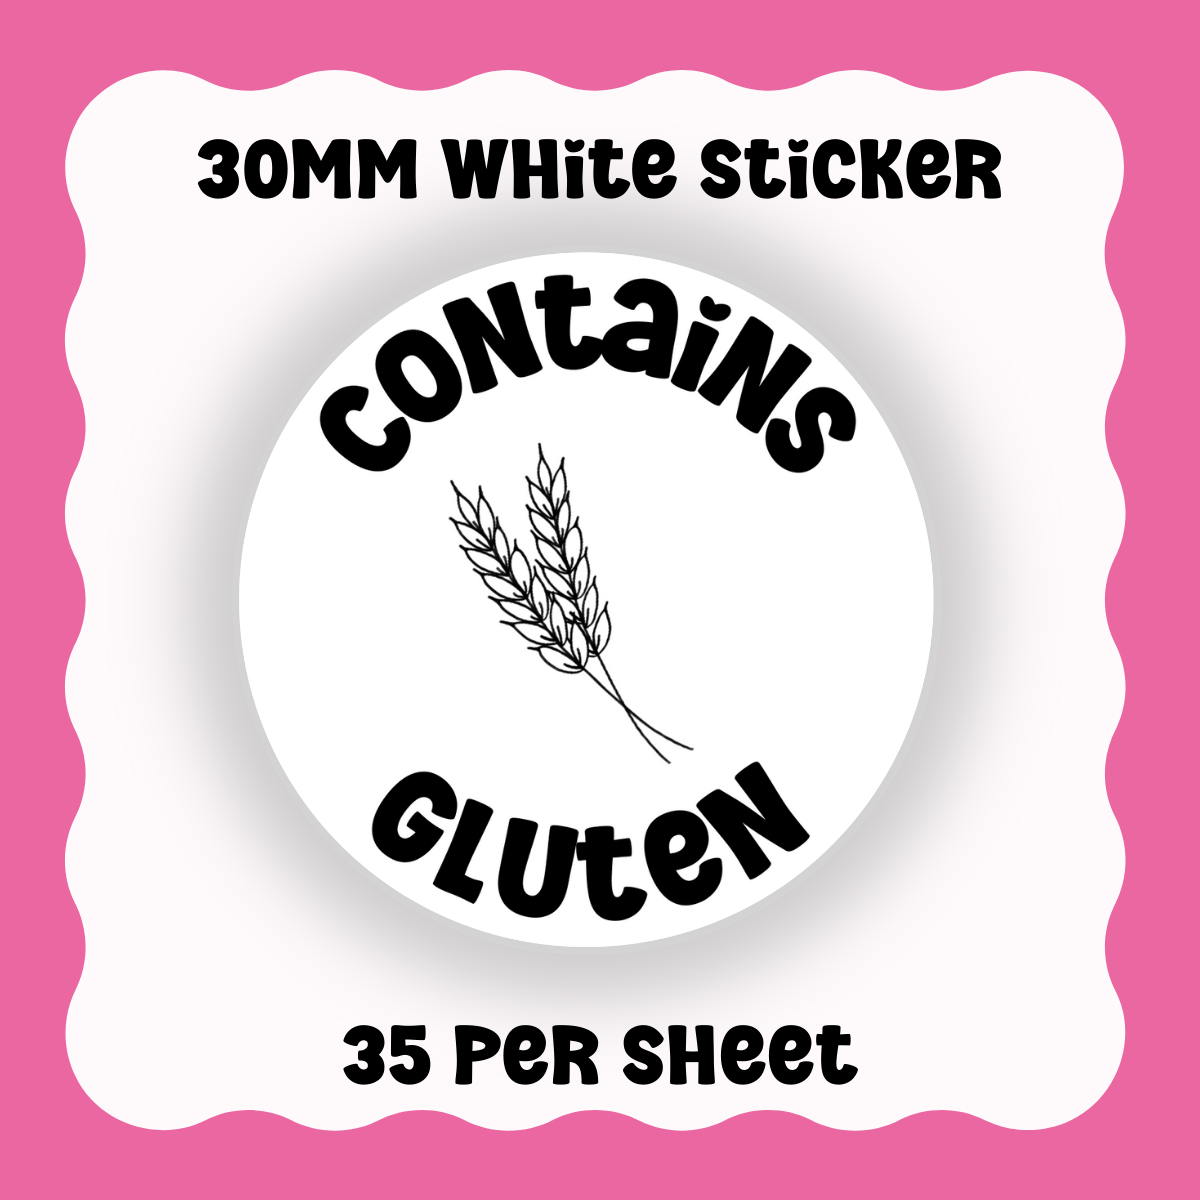 Contains Gluten - With Graphic